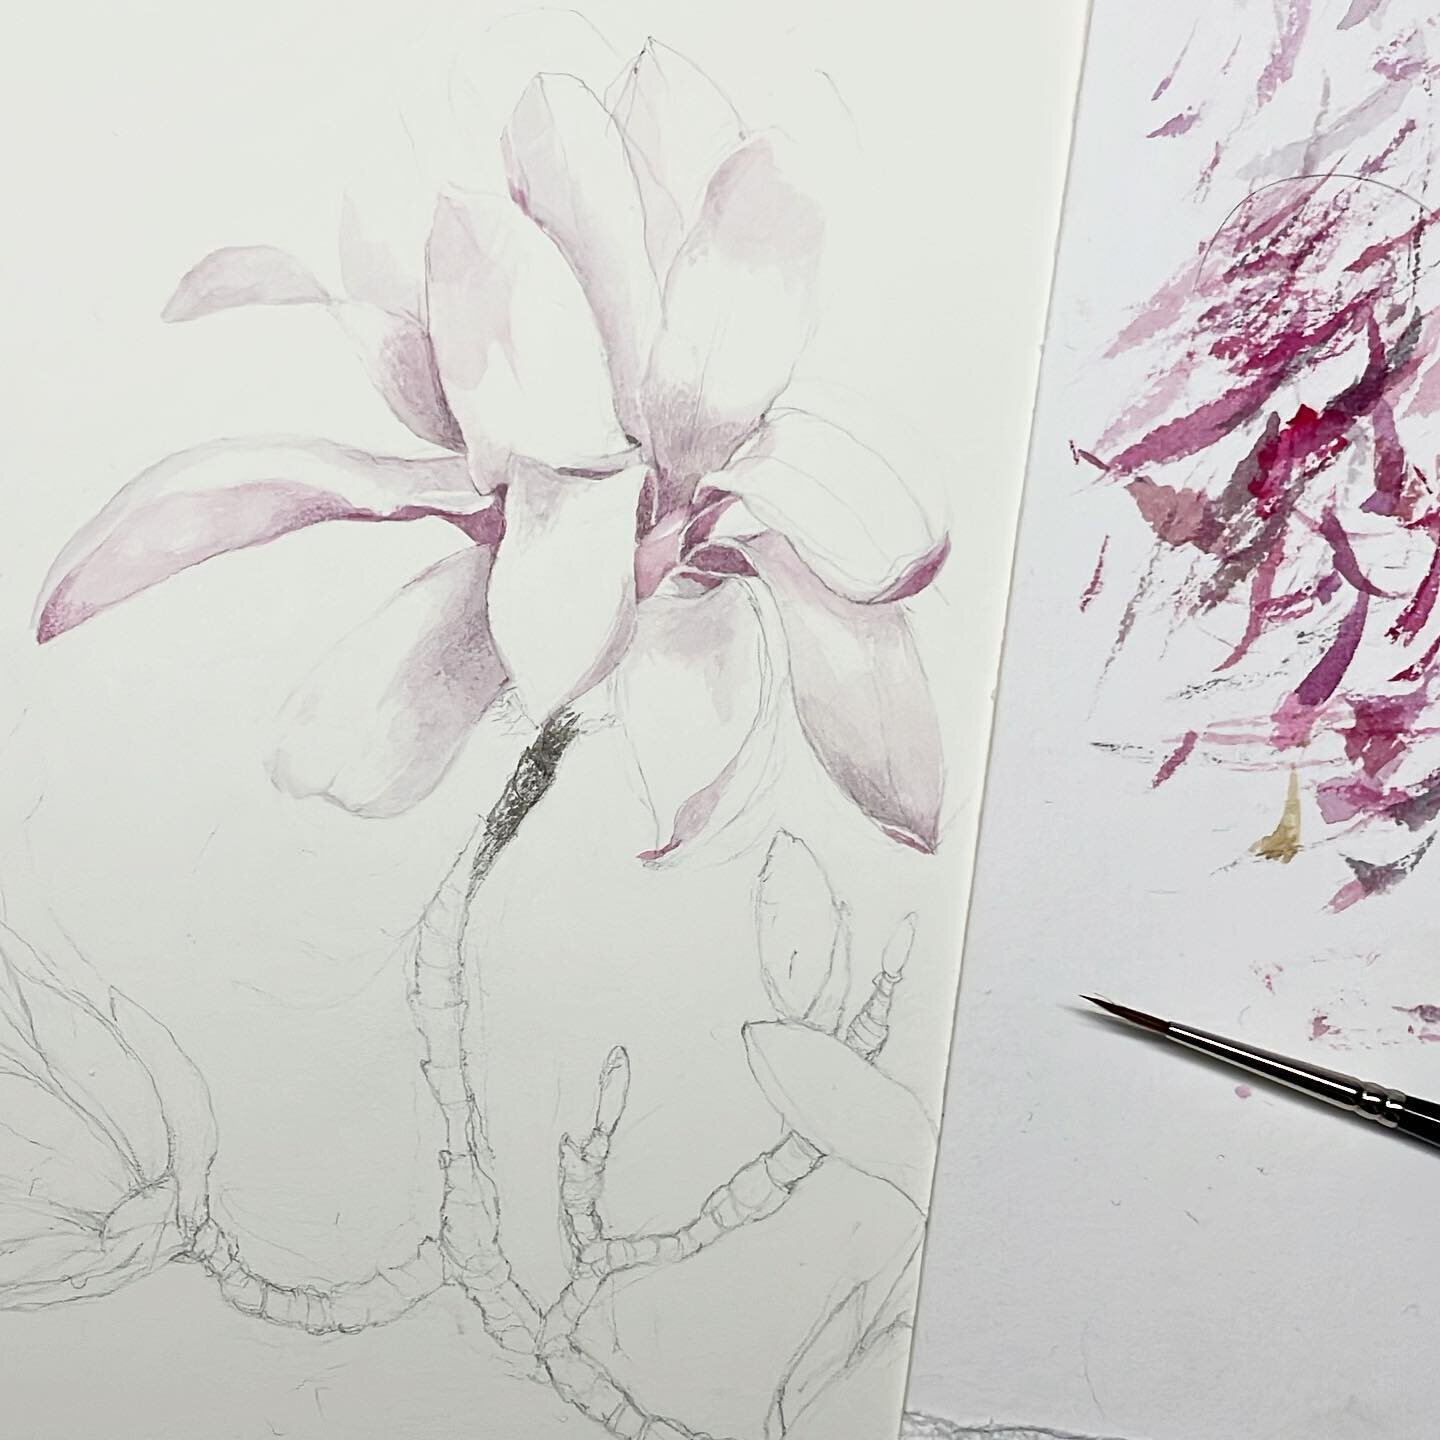 Magnolia on my desk today! #wip #commission #magnolia